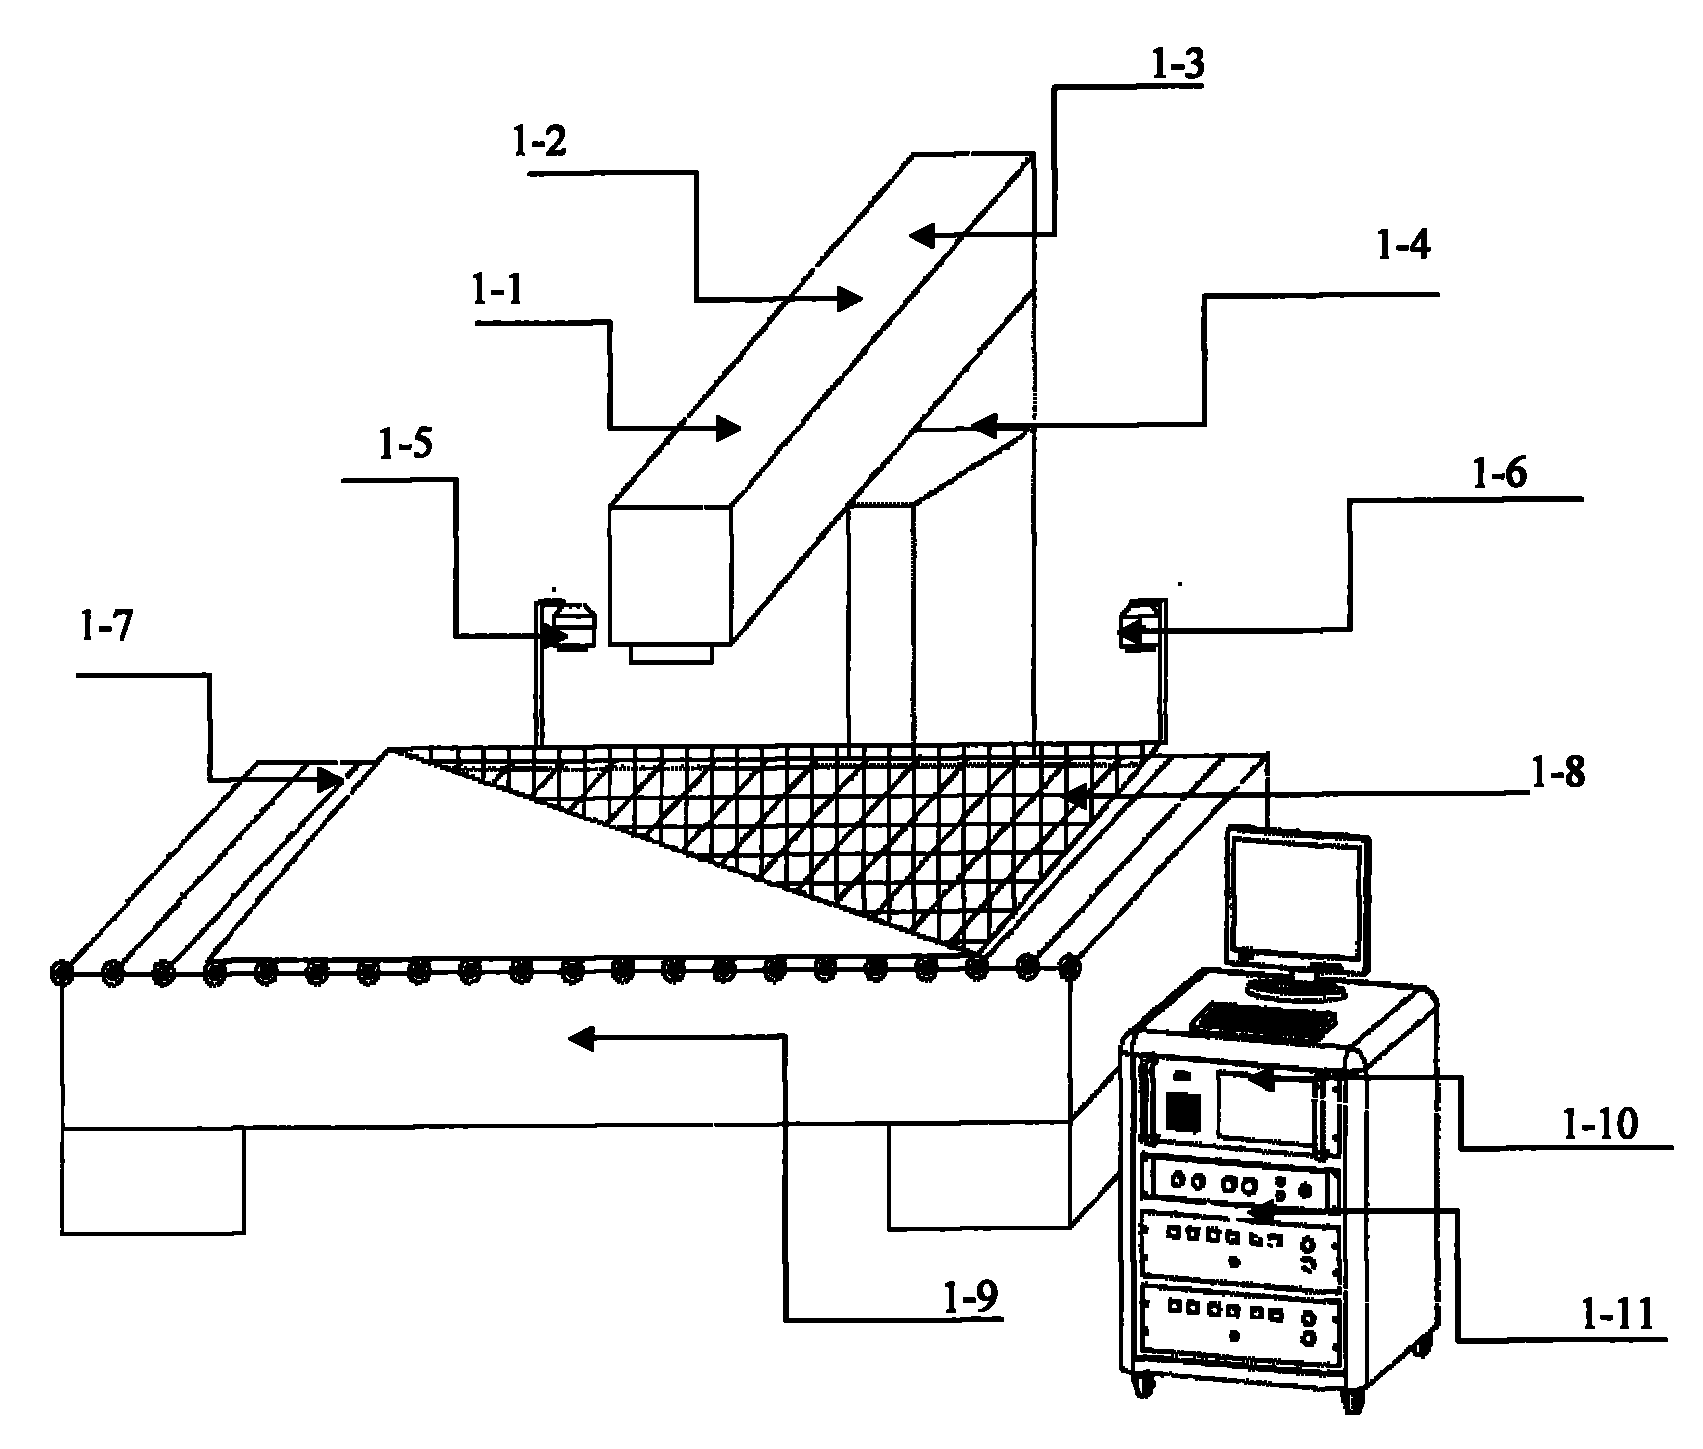 Novel apparatus used for film engraving and dotting of thin-film solar cell